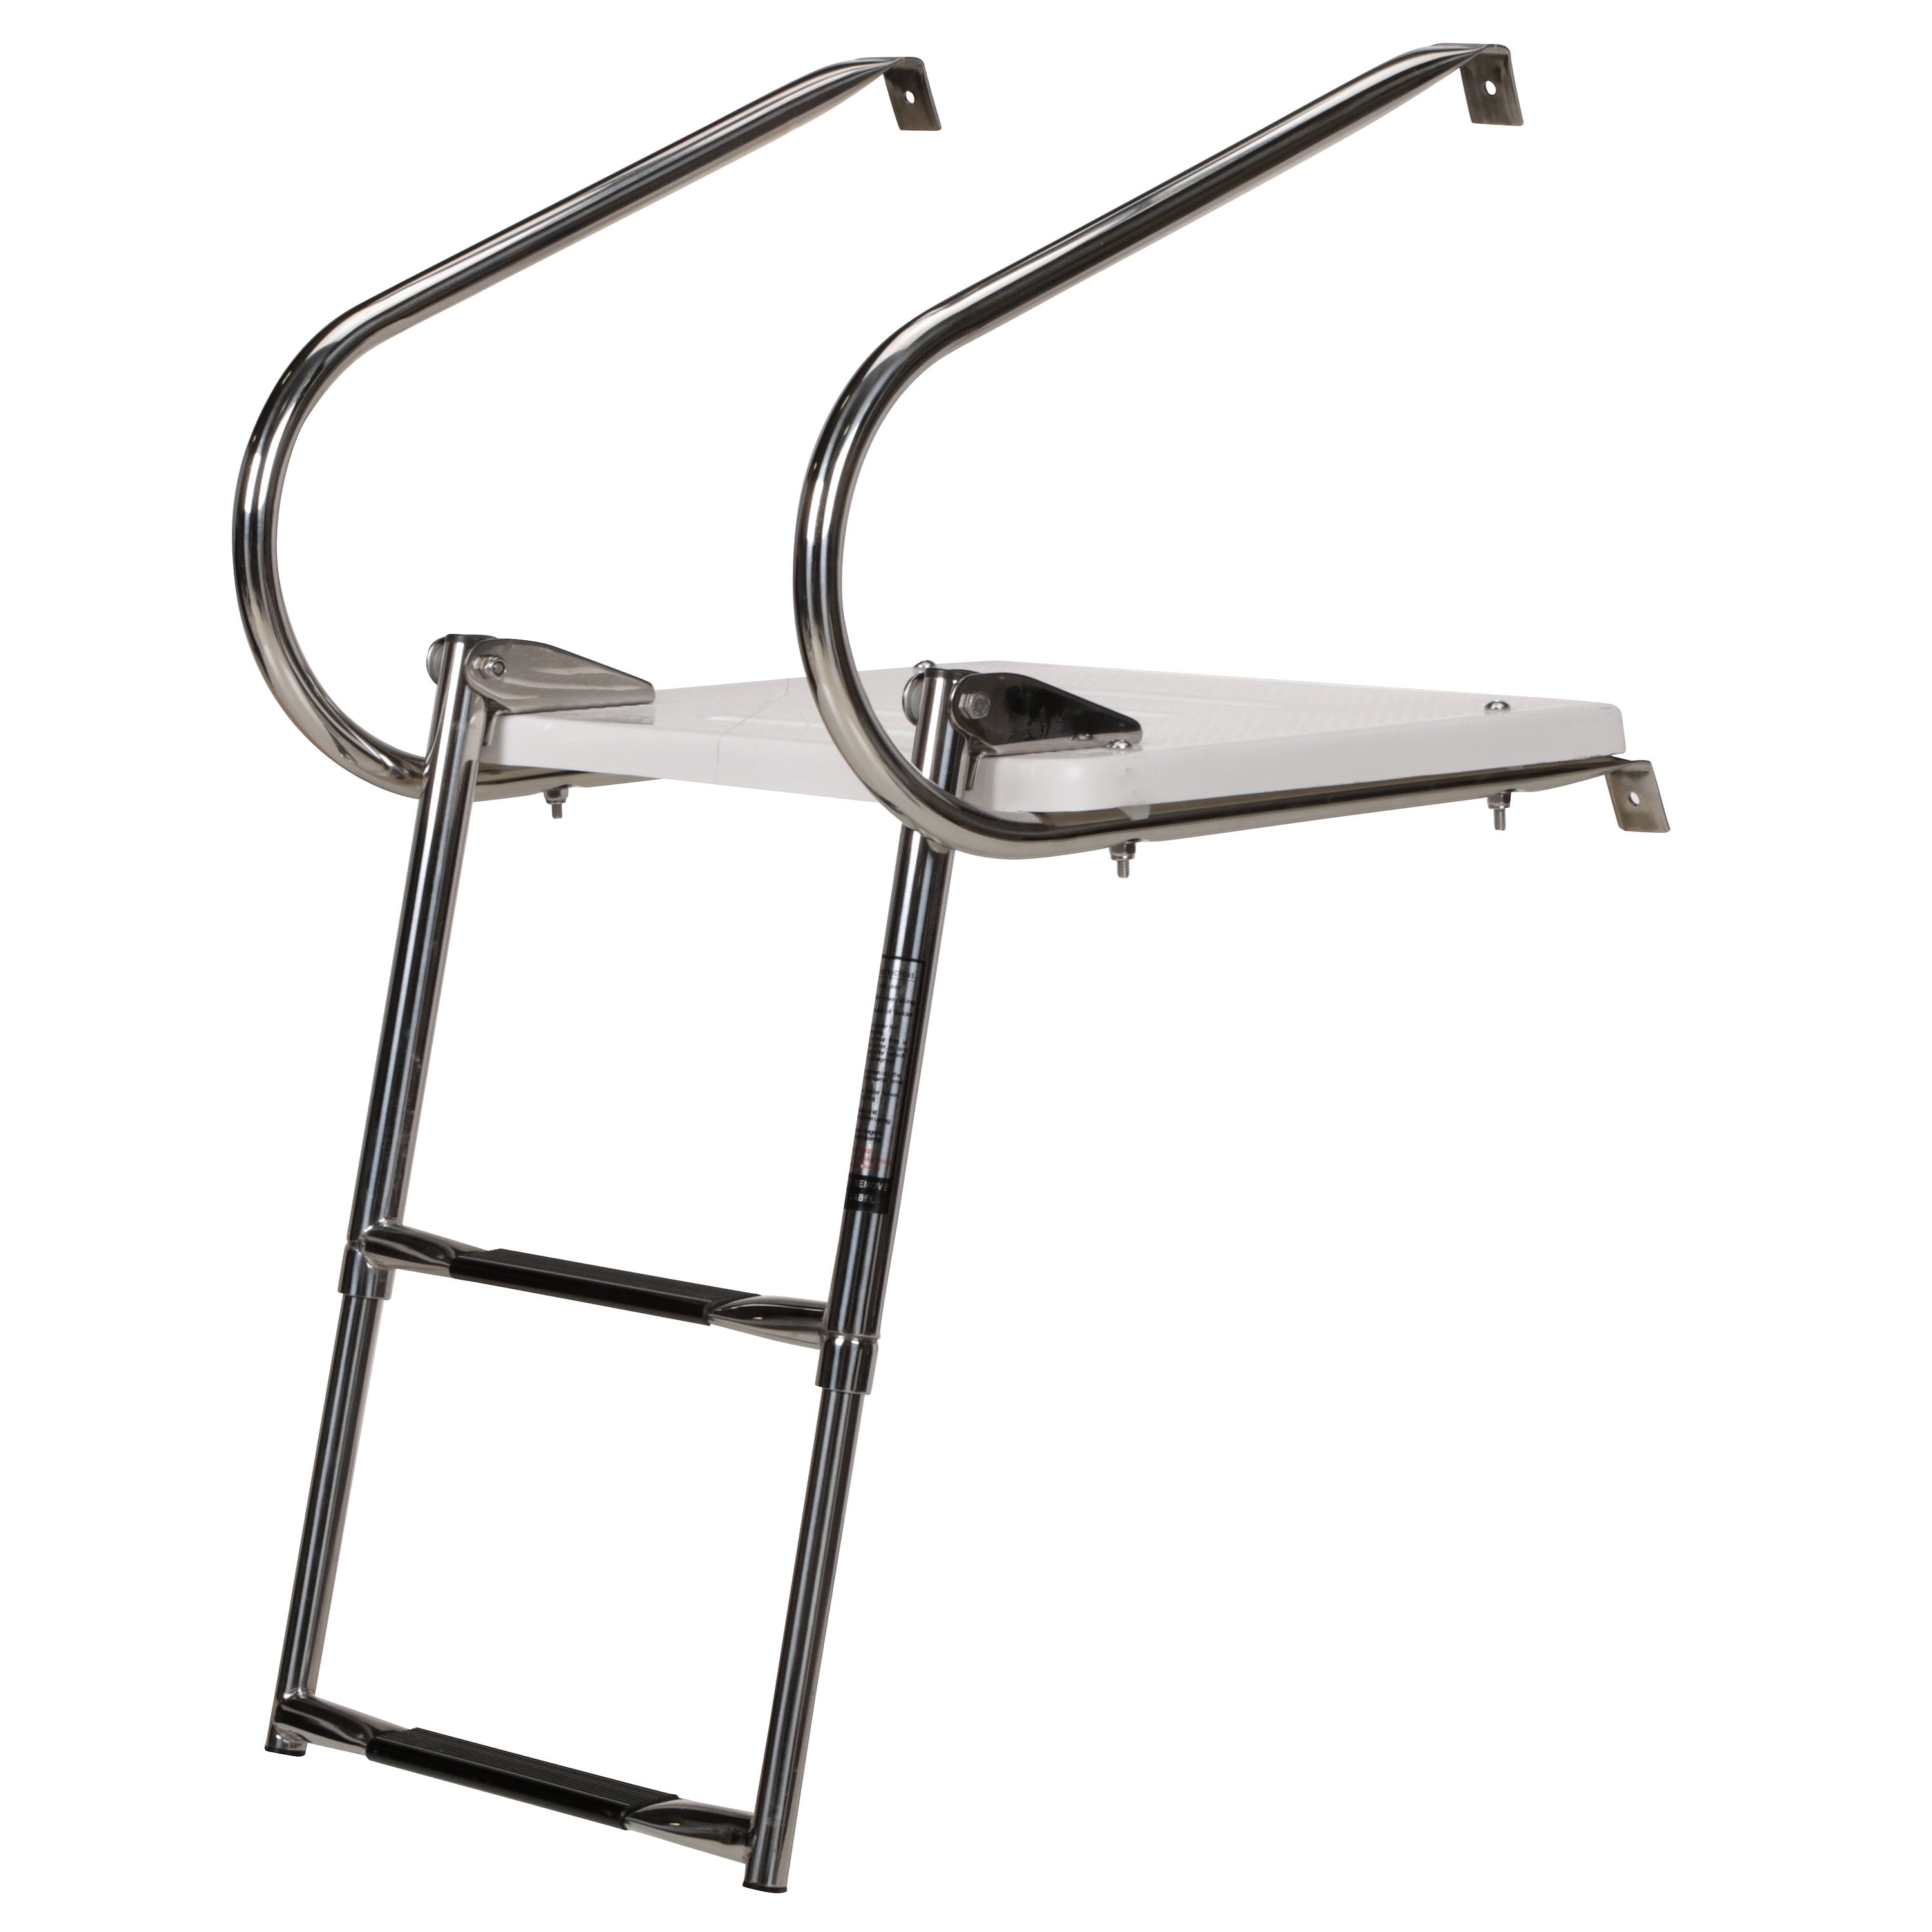 Ladder Only Seachoice 71321 Top Mount Telescoping Ladder for Universal Swim Platform 4 Step Stainless Steel Tubing